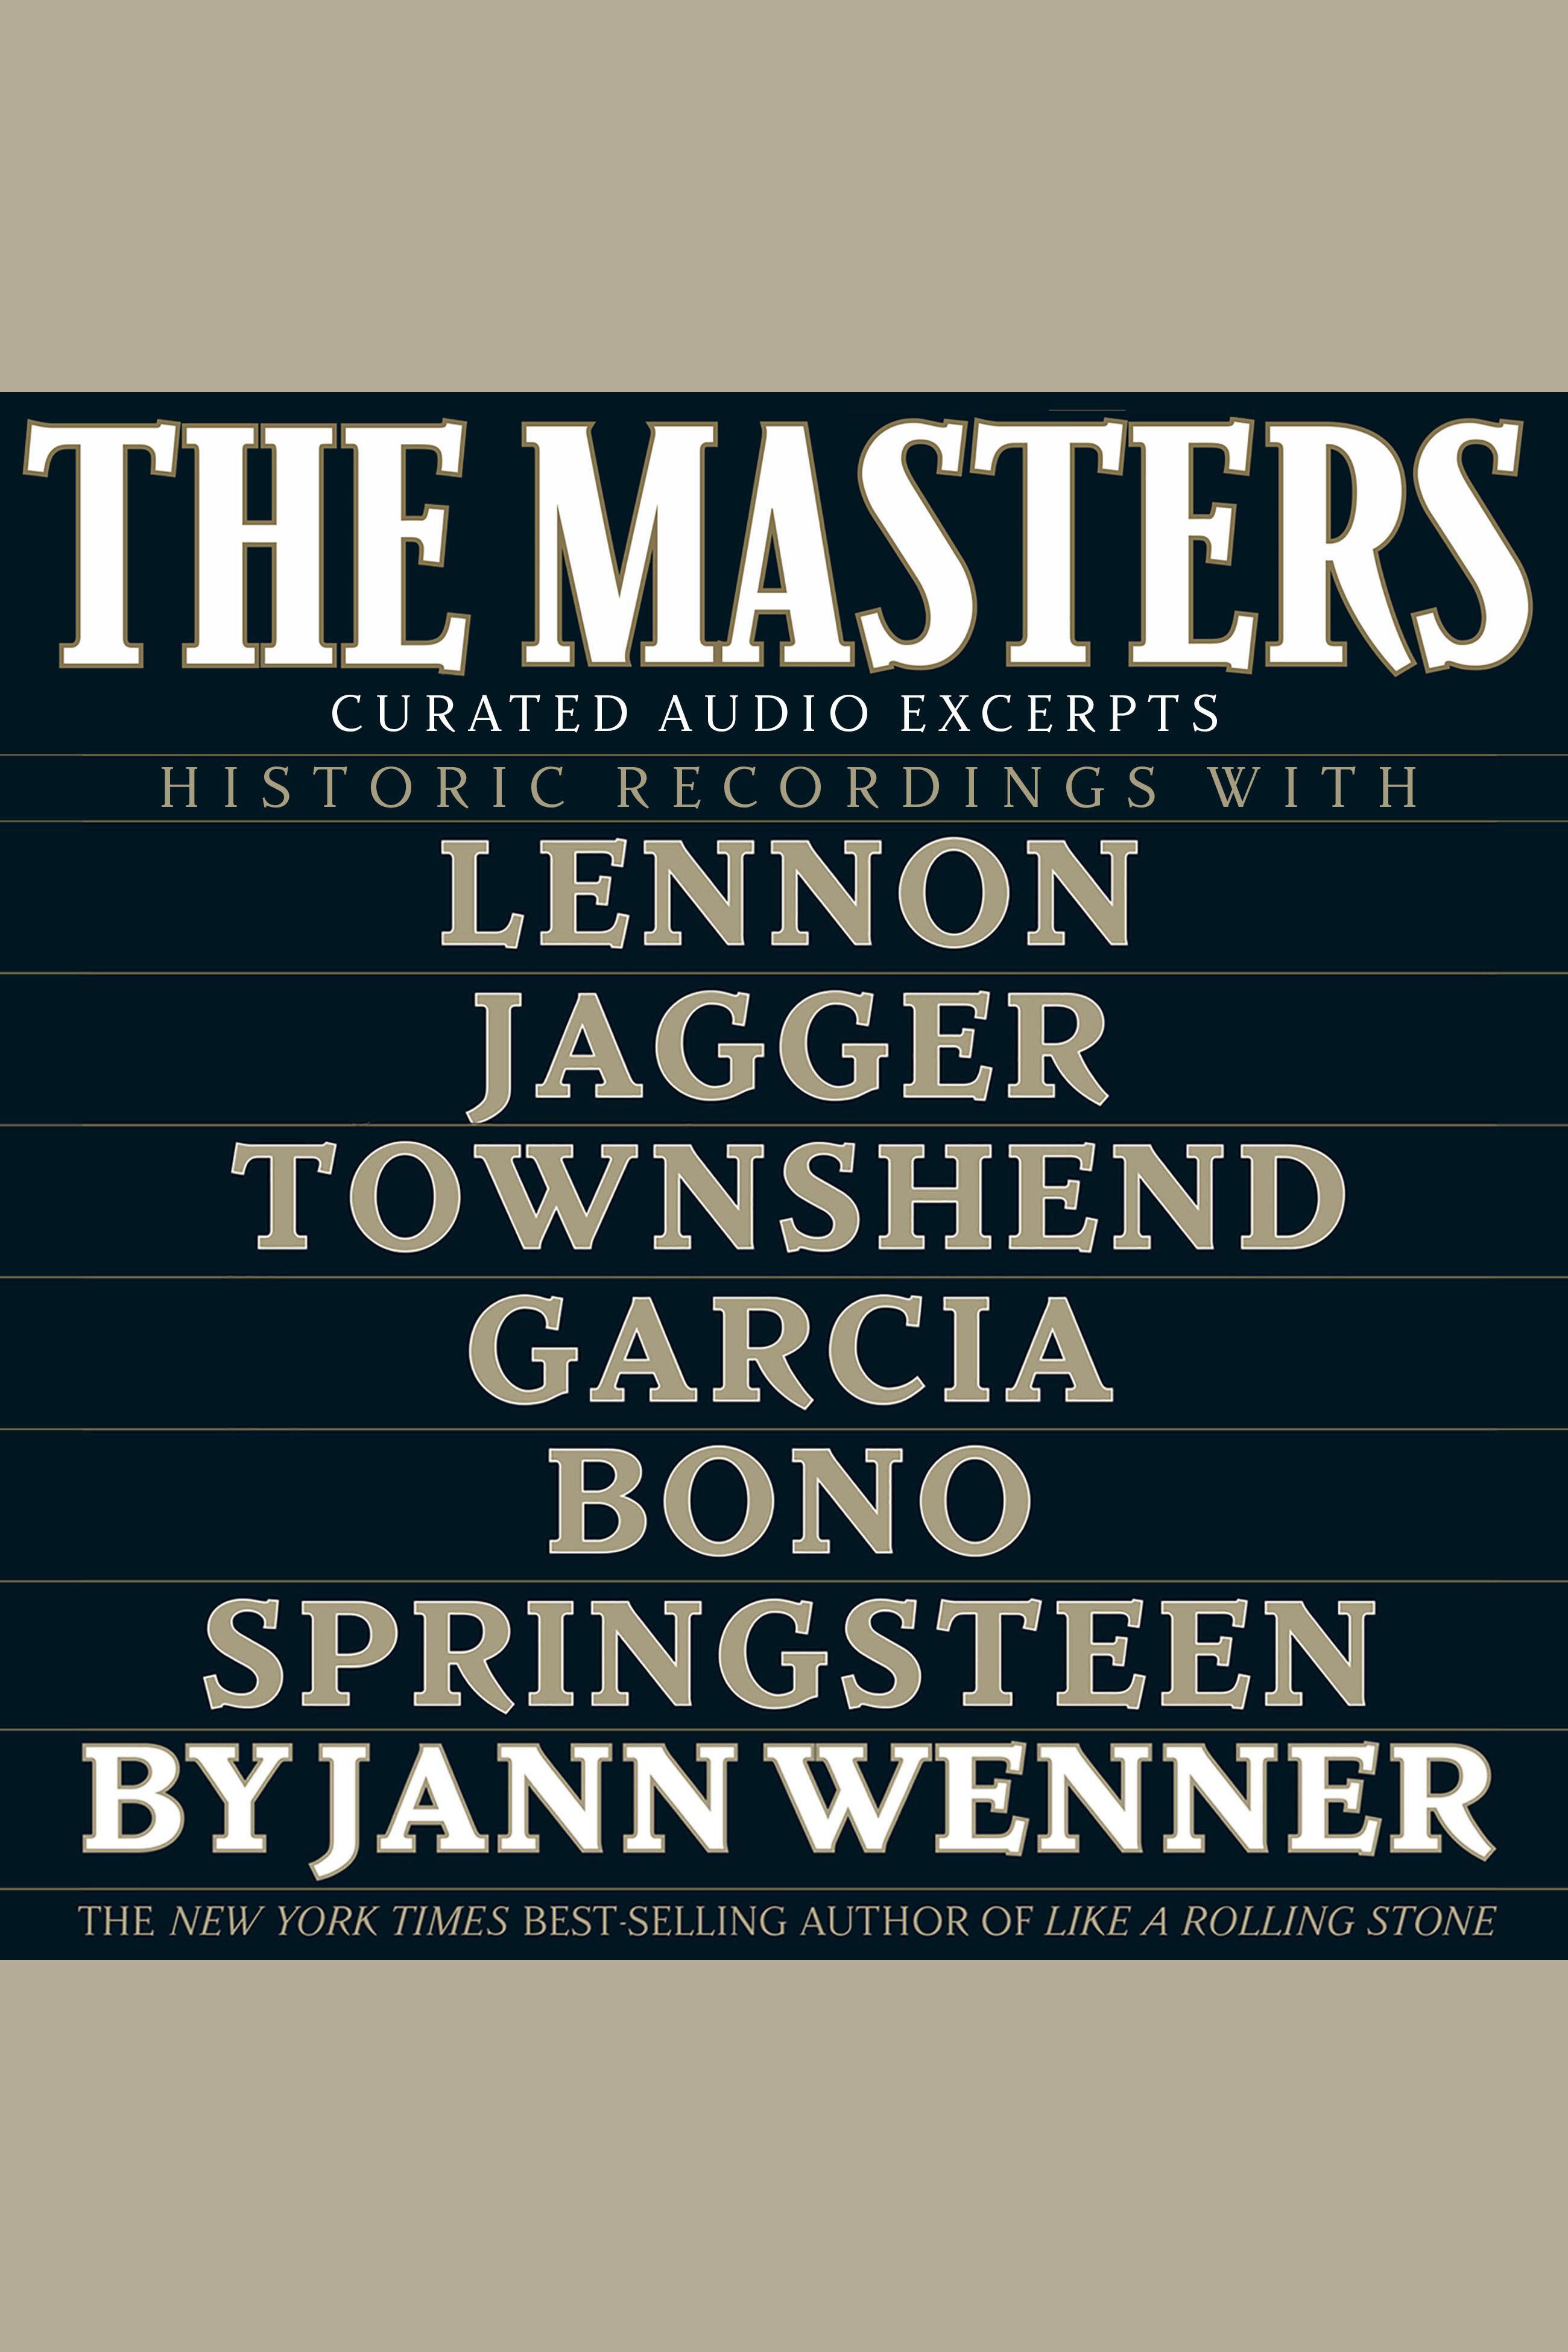 The Masters: Curated Audio Excerpts Historic recordings with Lennon, Jagger, Townshend, Garcia, Bono, and Springsteen cover image